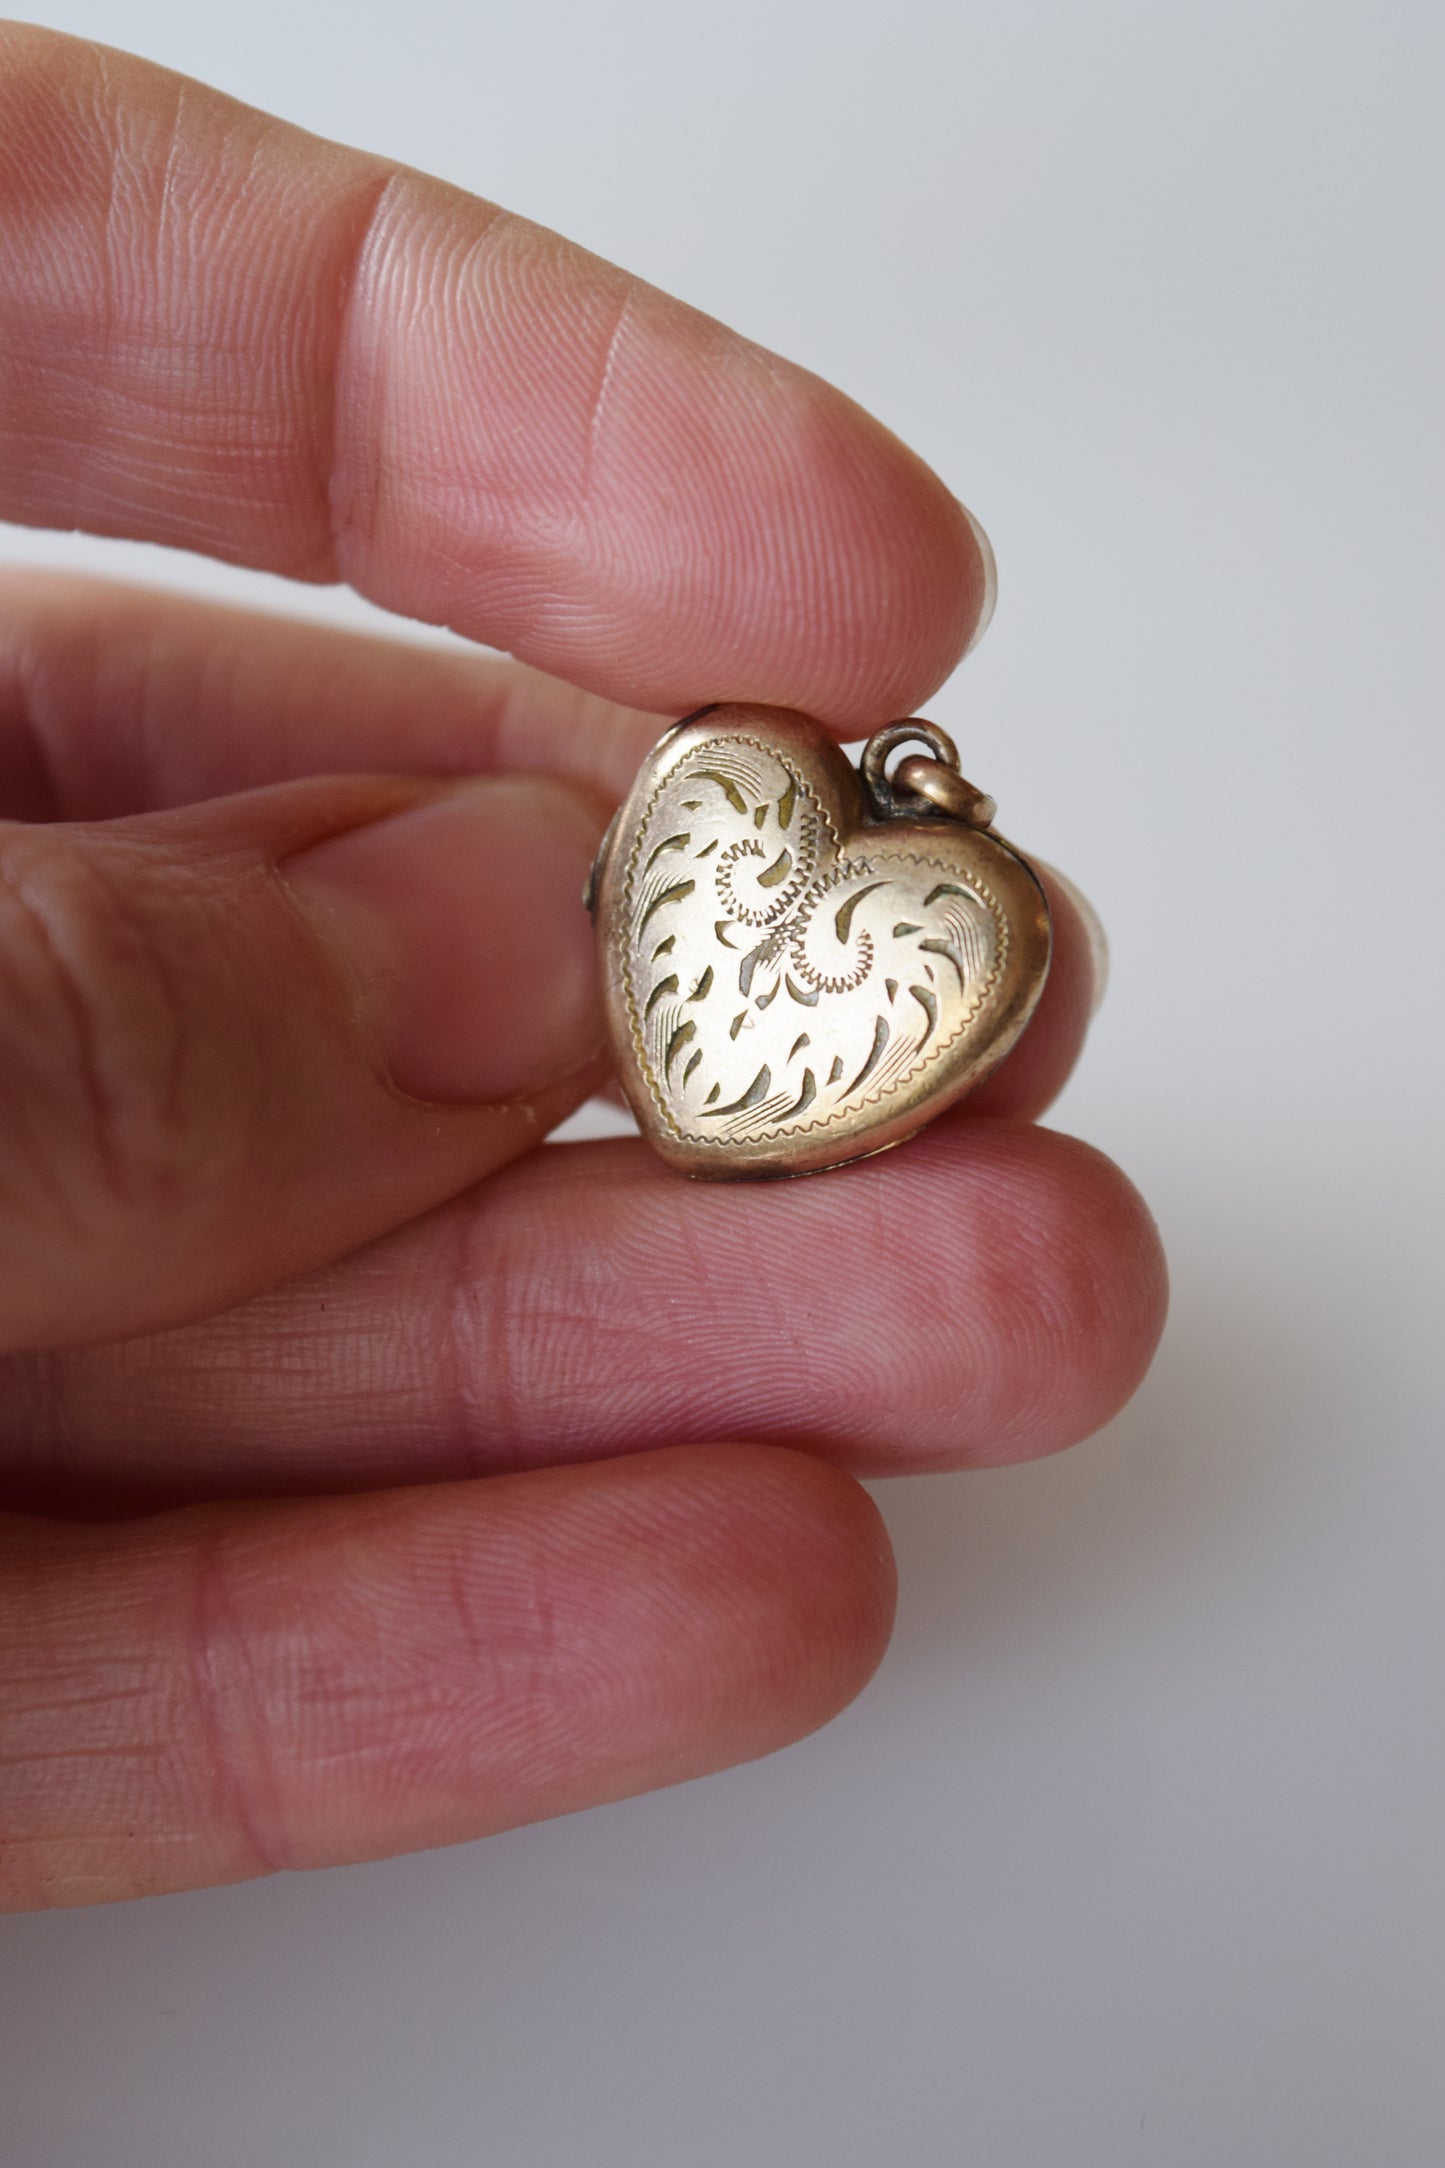 Antique Gold Fill Heart Locket | Scrolled Engraving